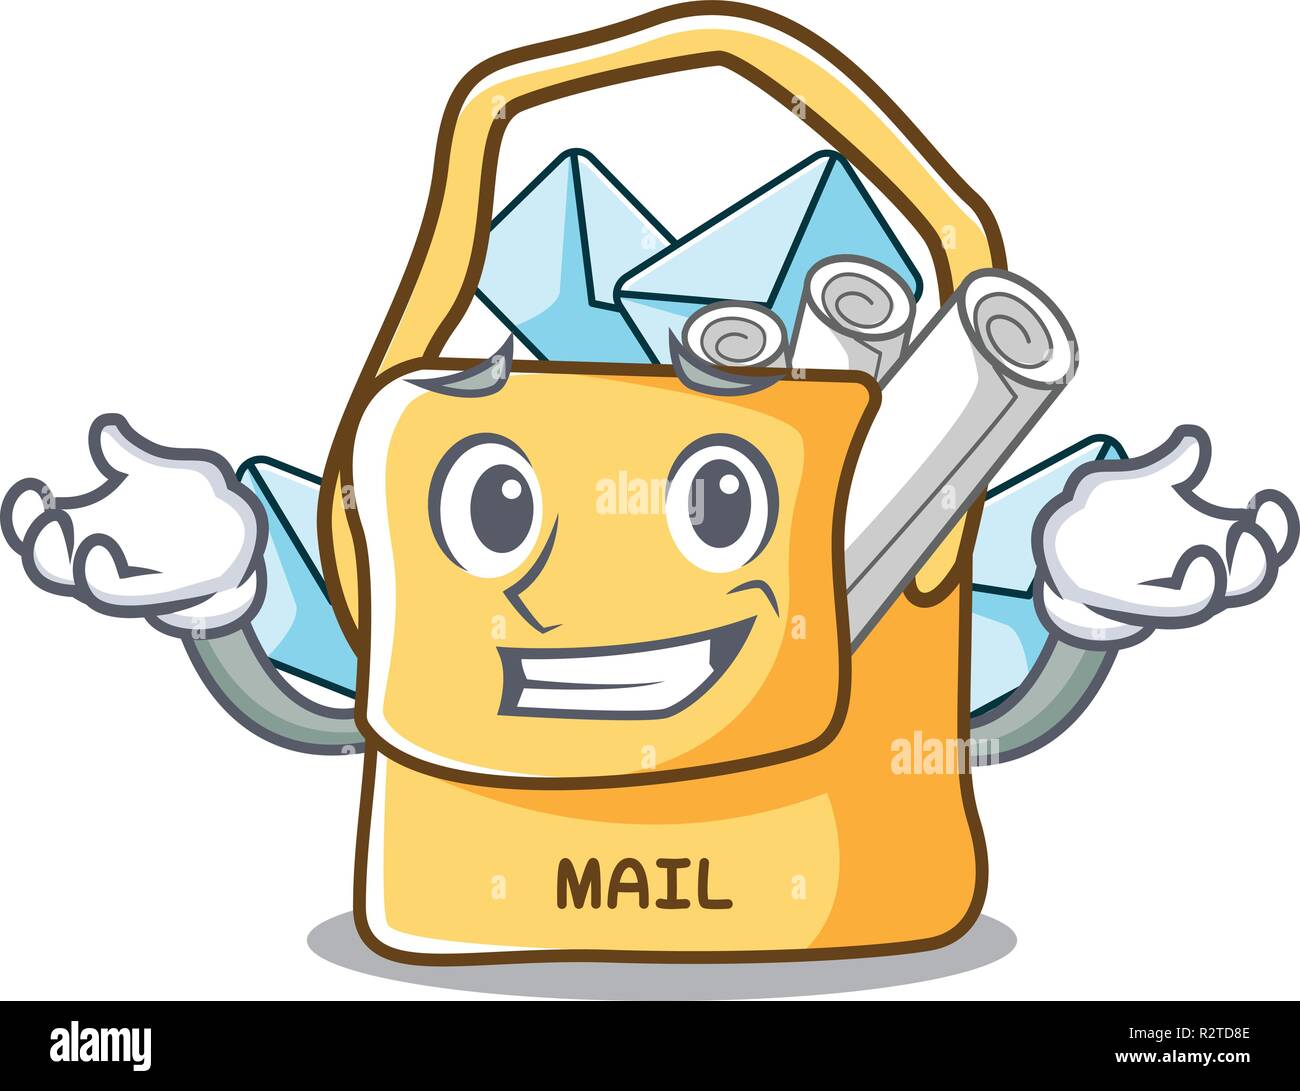 Grinning the bag with shape mail cartoon Stock Vector